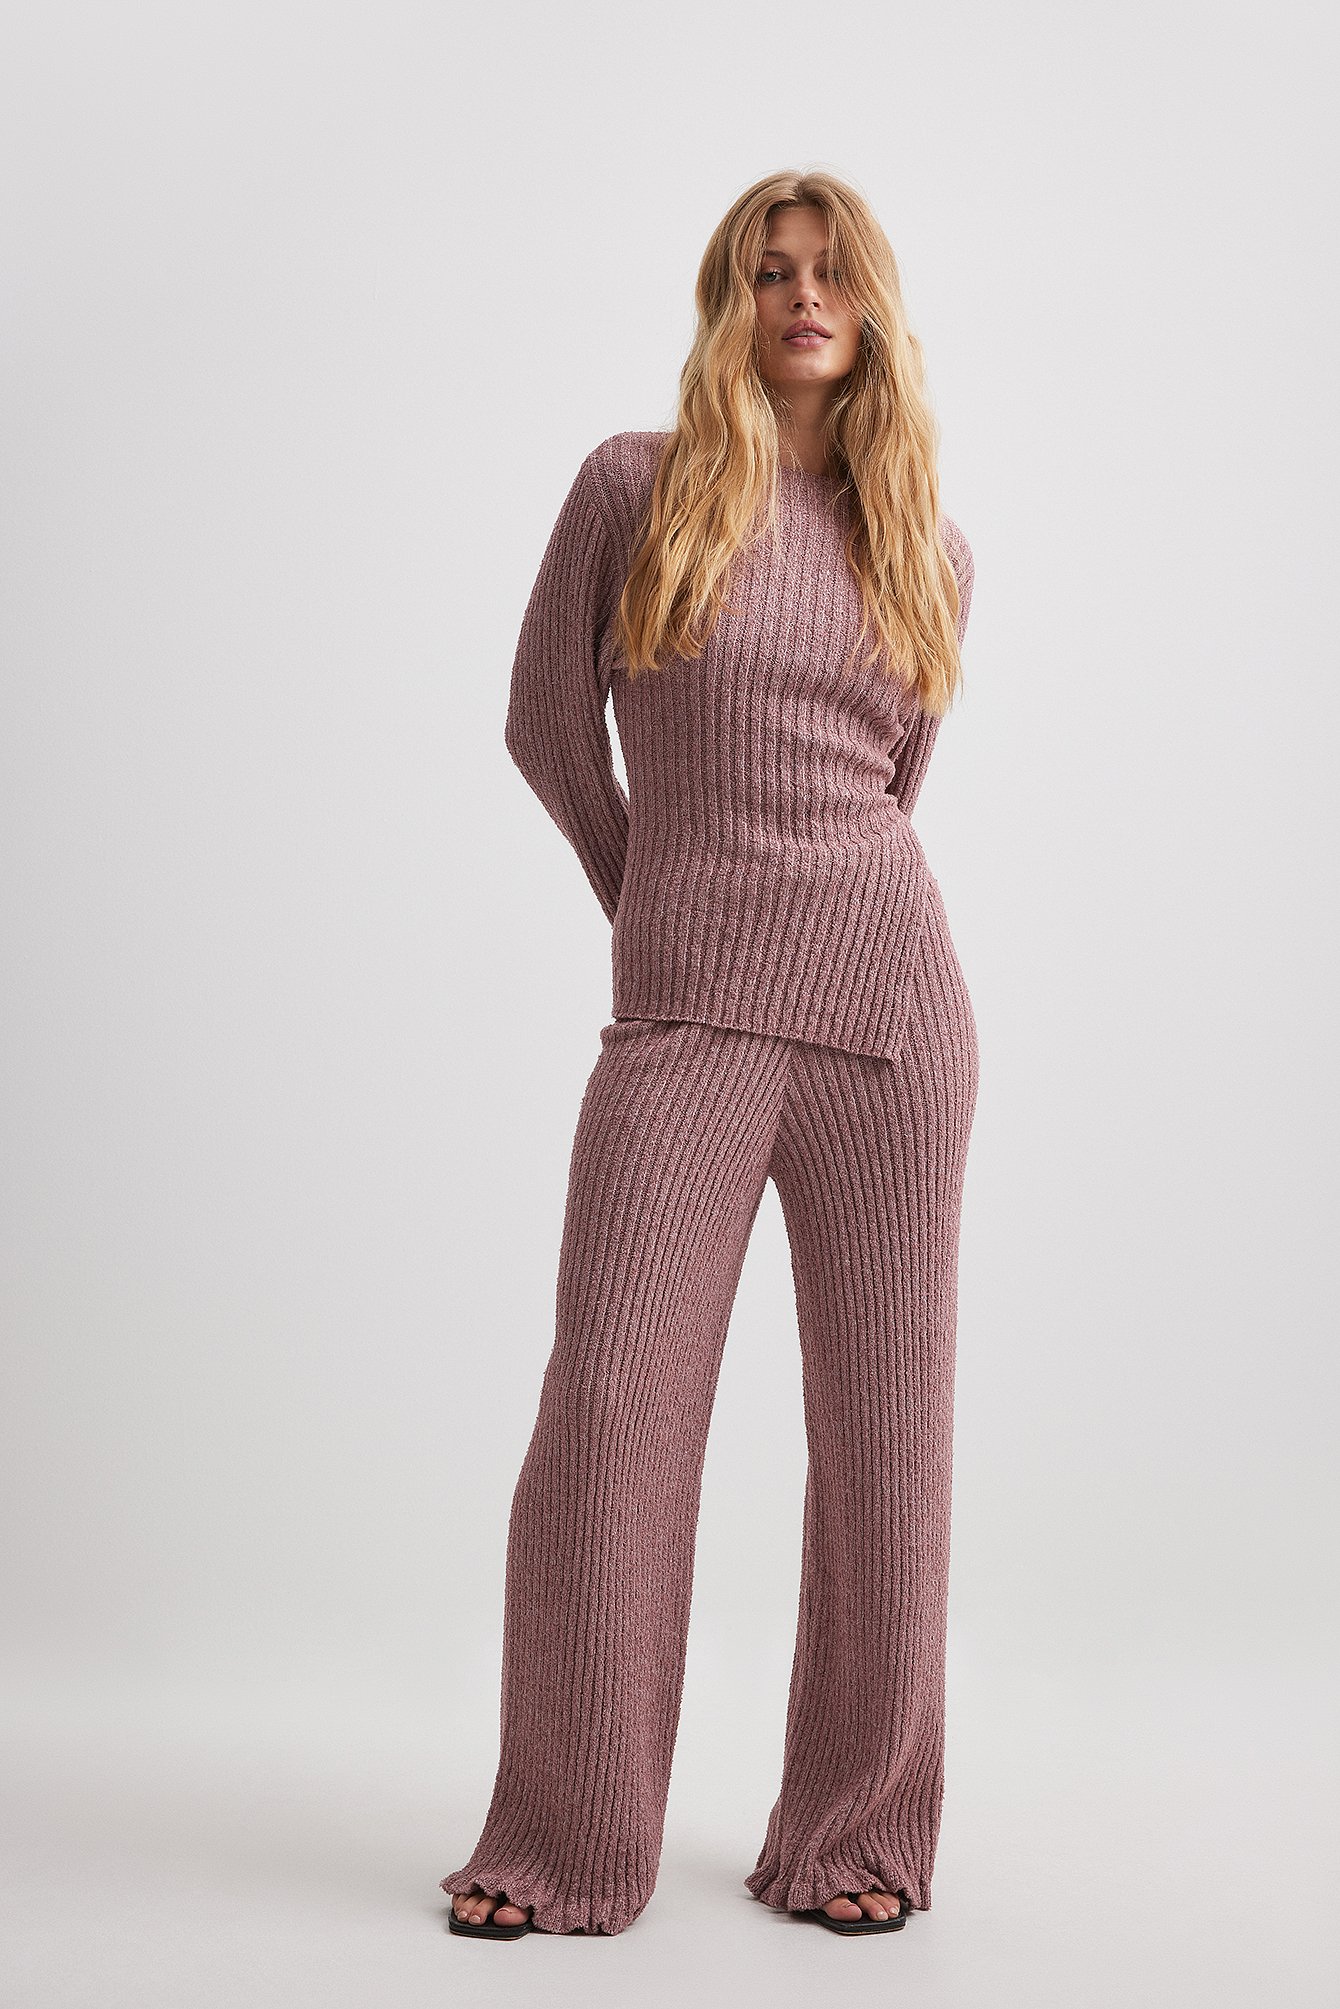 Micaela Greg Faded Olive Knit Trouser at General Store